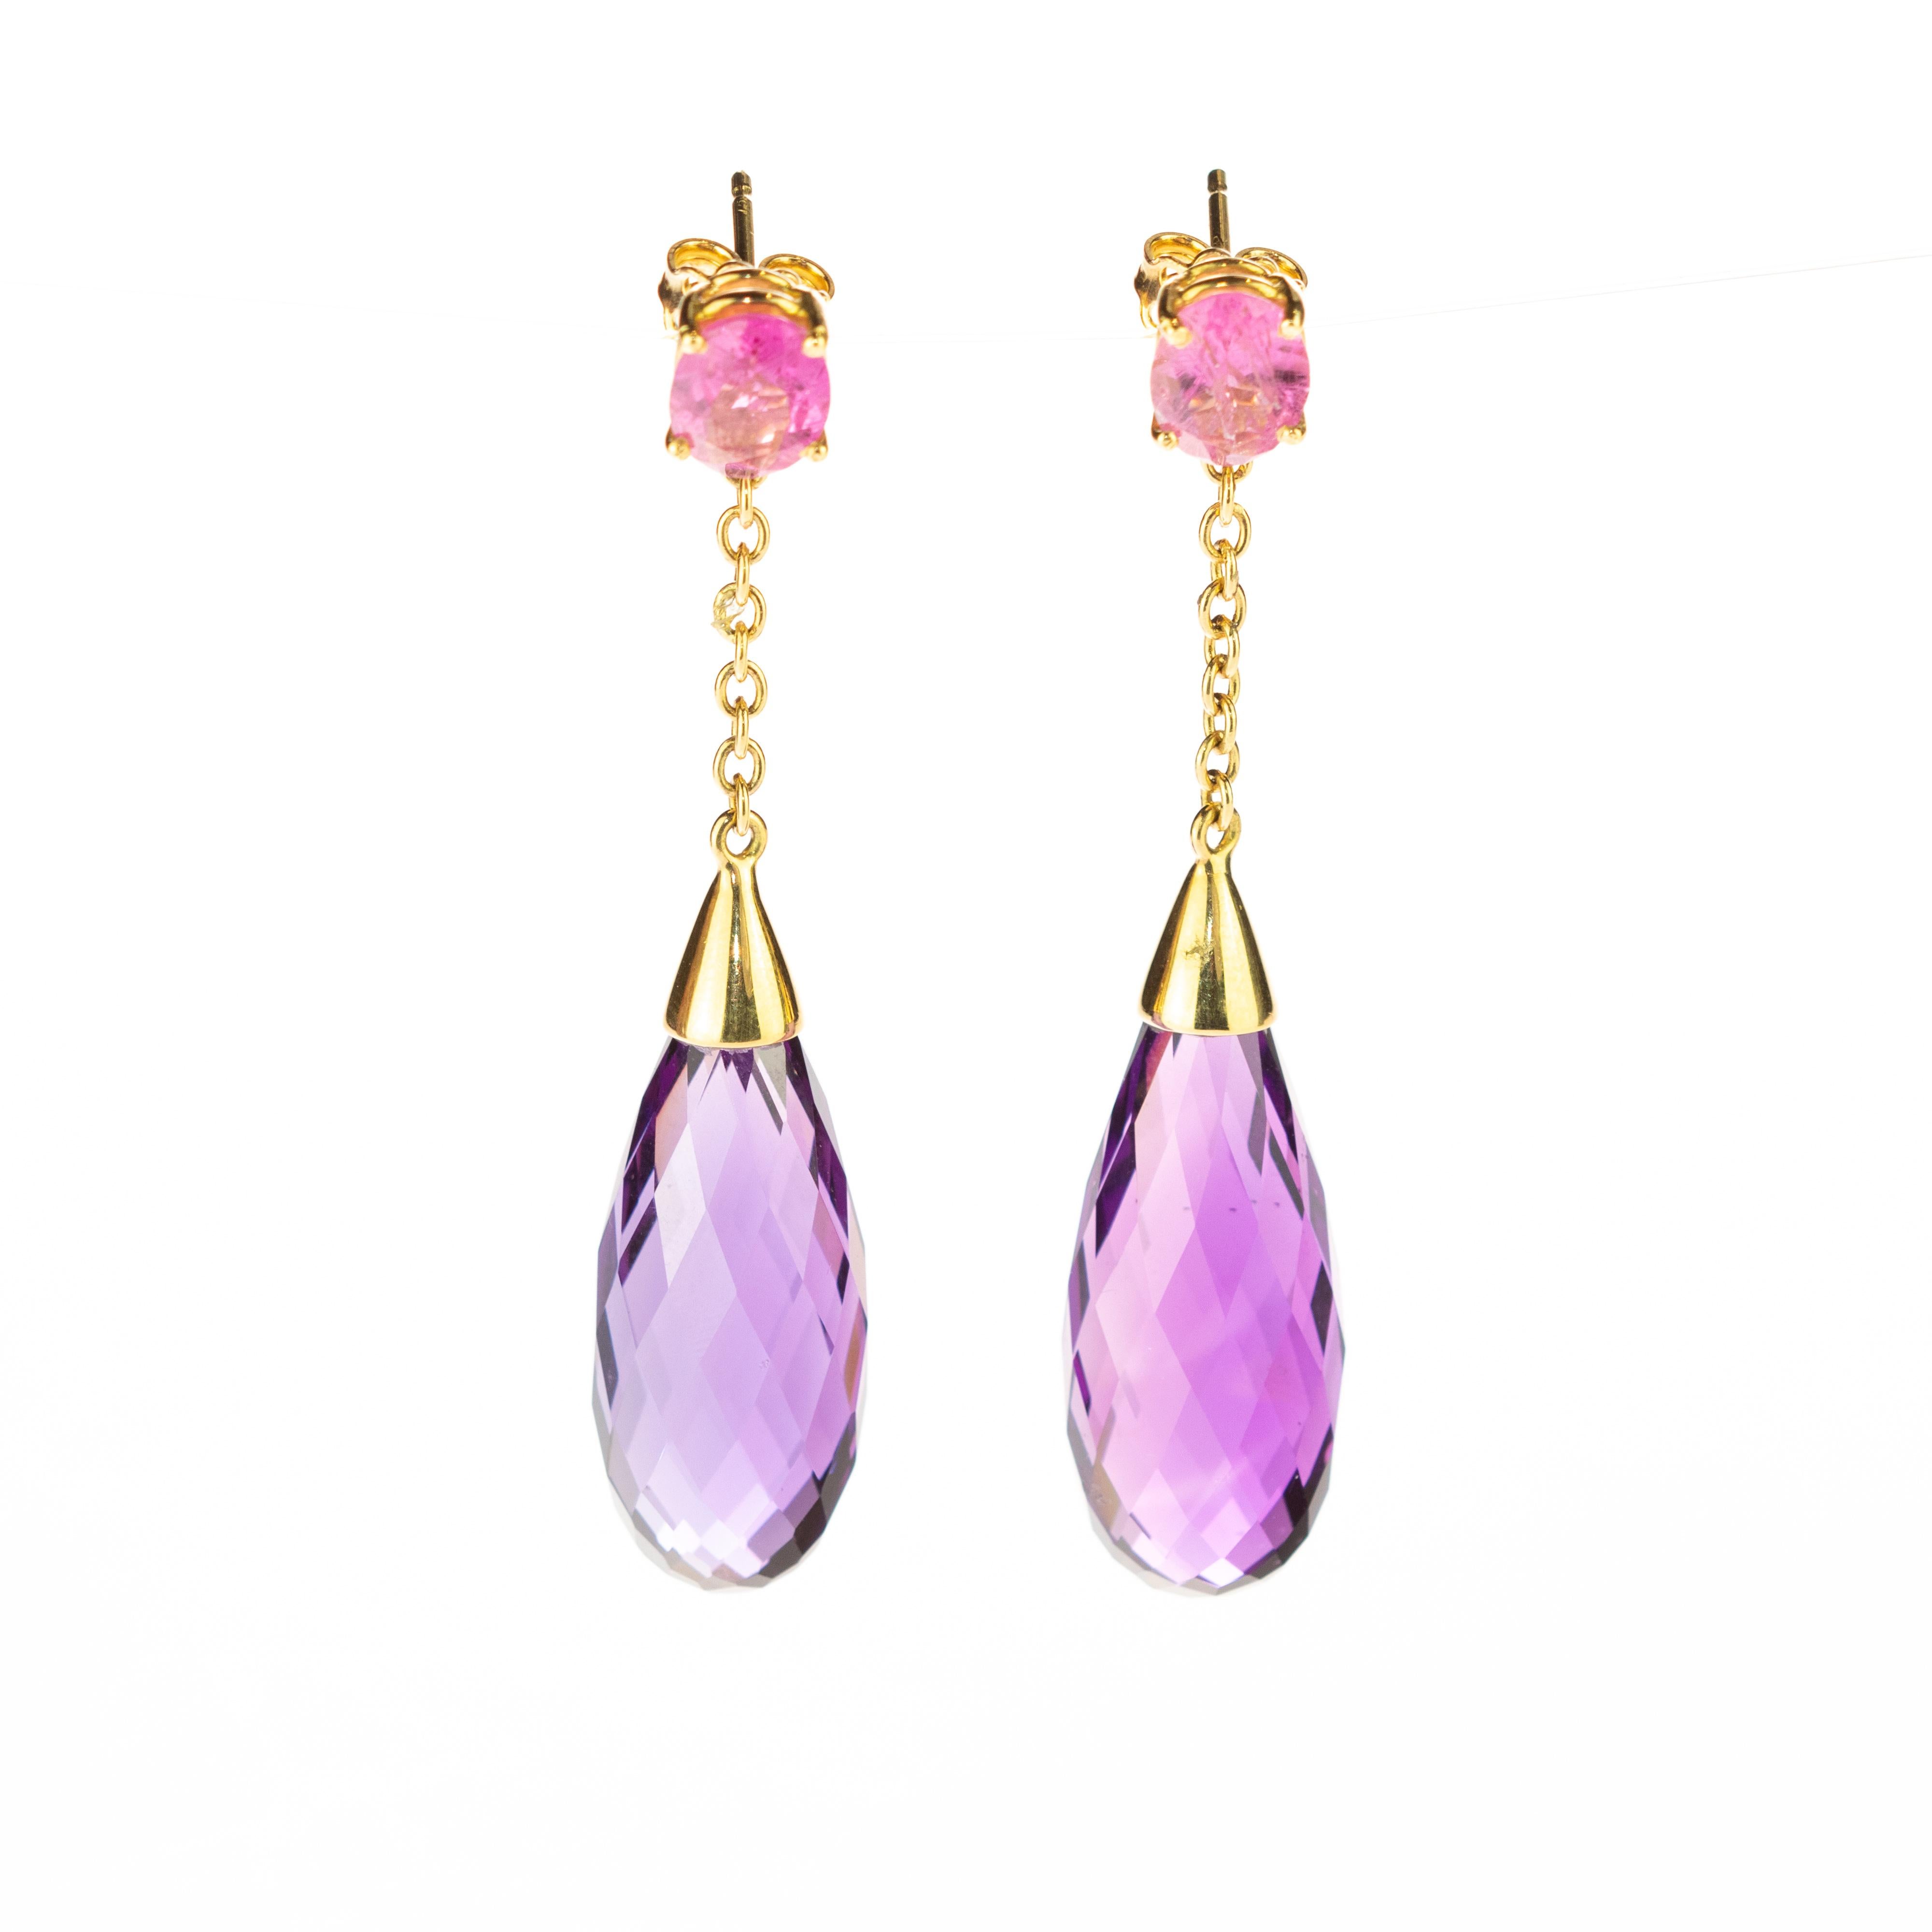 An enchanted radiant pink earrings held by 18 karat gold delicated chain to a deep purple amethyst tourmaline tear. Modern tear designs jewels that combine voluminous shapes with vivid colours, resulting in bold, free-spirited pieces with a charming